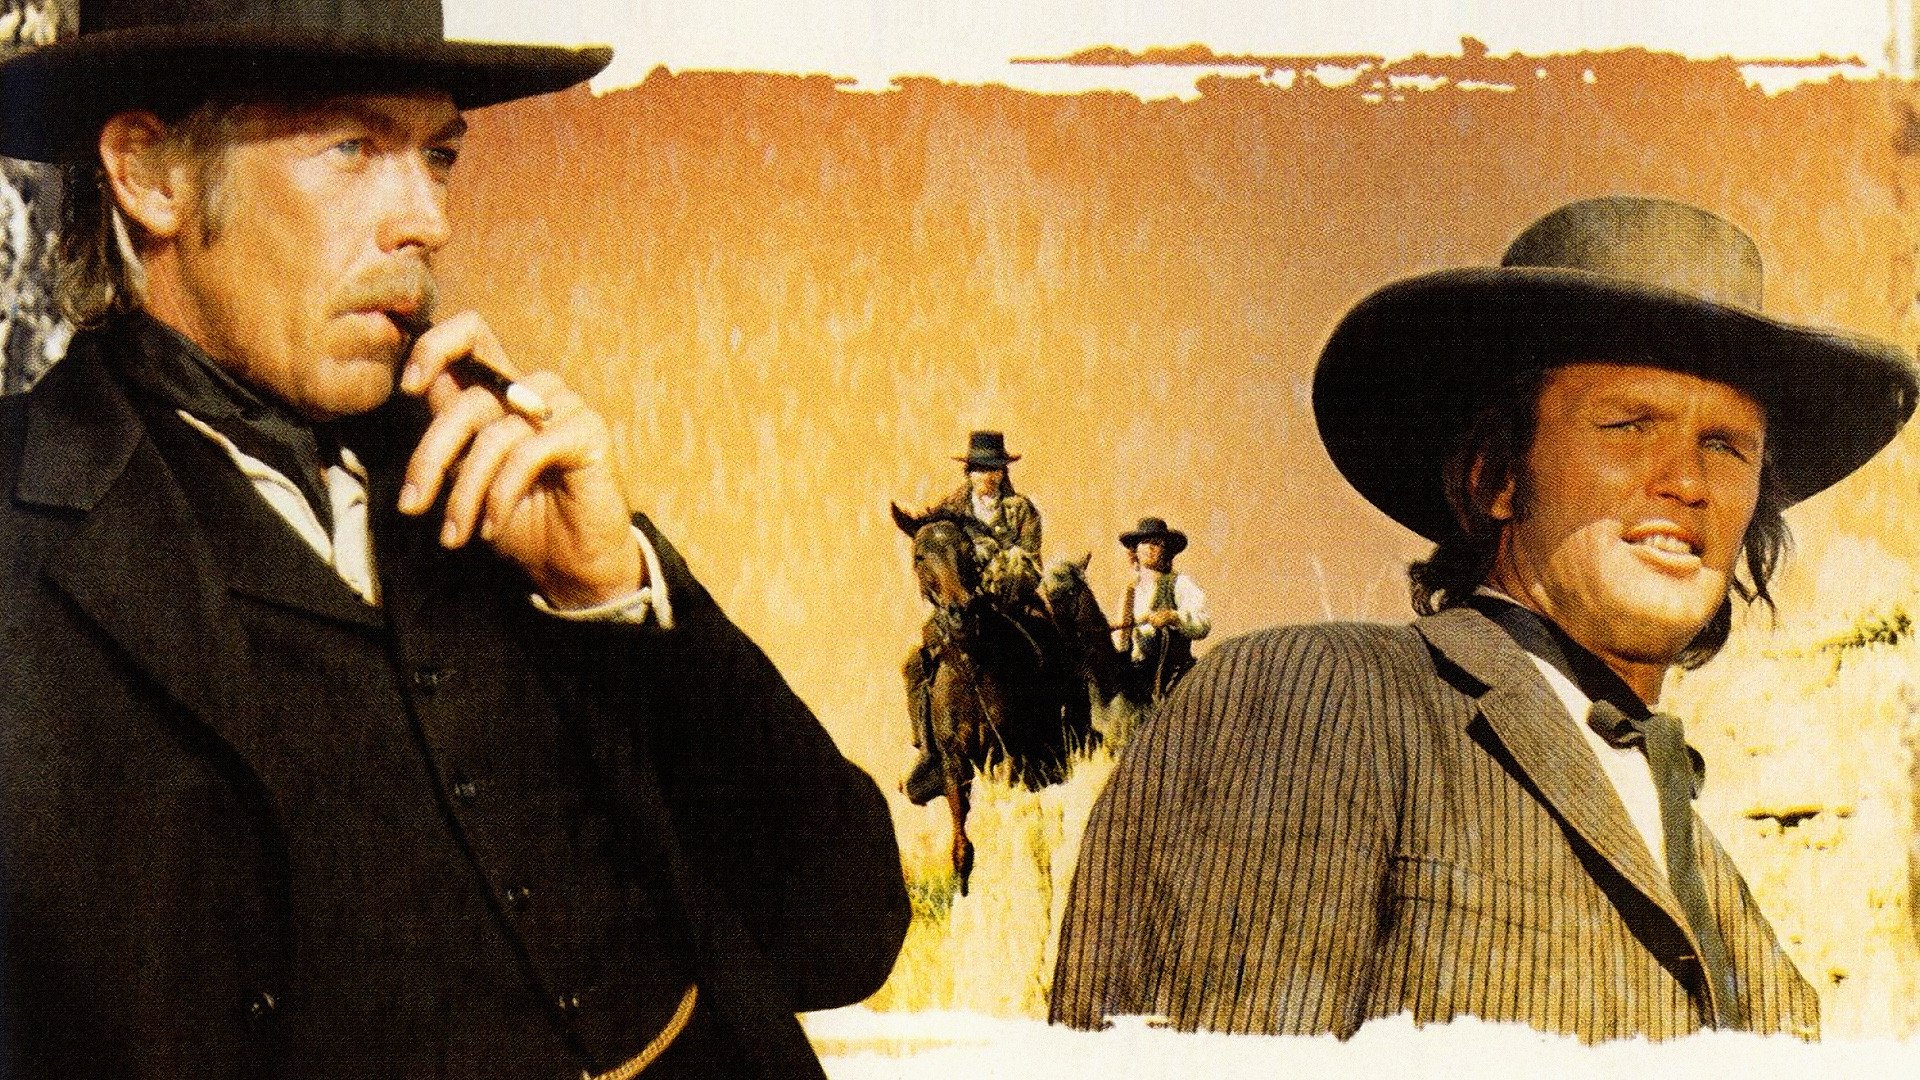 PAT GARRETT AND BILLY THE KID From Hell